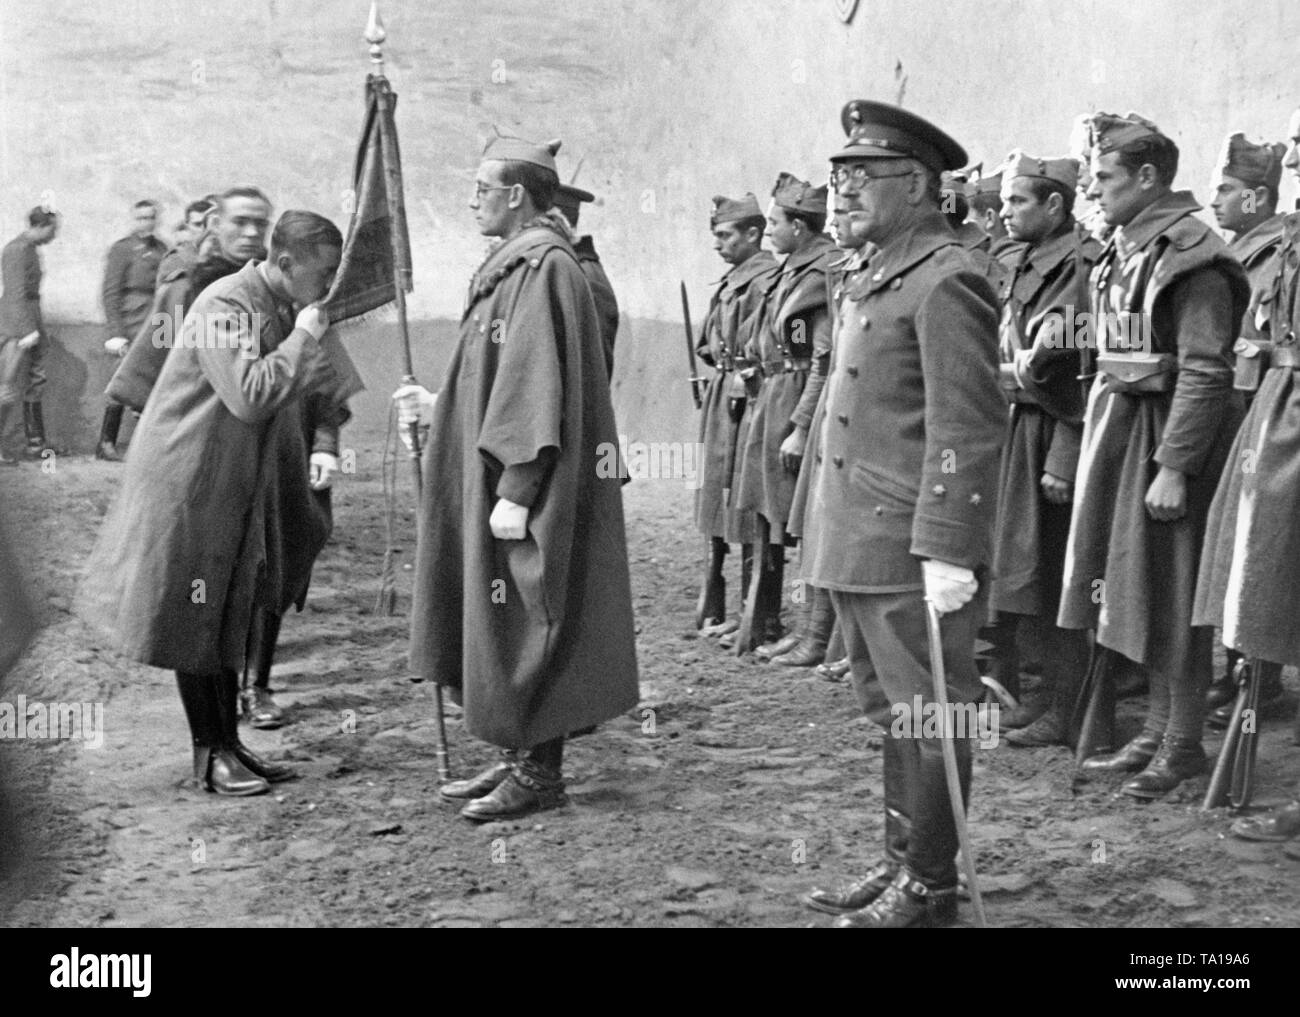 The photo shows an officer in uniform and loden cape as he kisses the Bandera (the red-yellow-red flag of Spain, held by a major) during his swearing-in. Previously, there was a worship service in the Burgos Officer Candidate School in Castile and Leon, Spain. In the front, an instructor and a lieutenant with a saber and an umbrella. Stock Photo